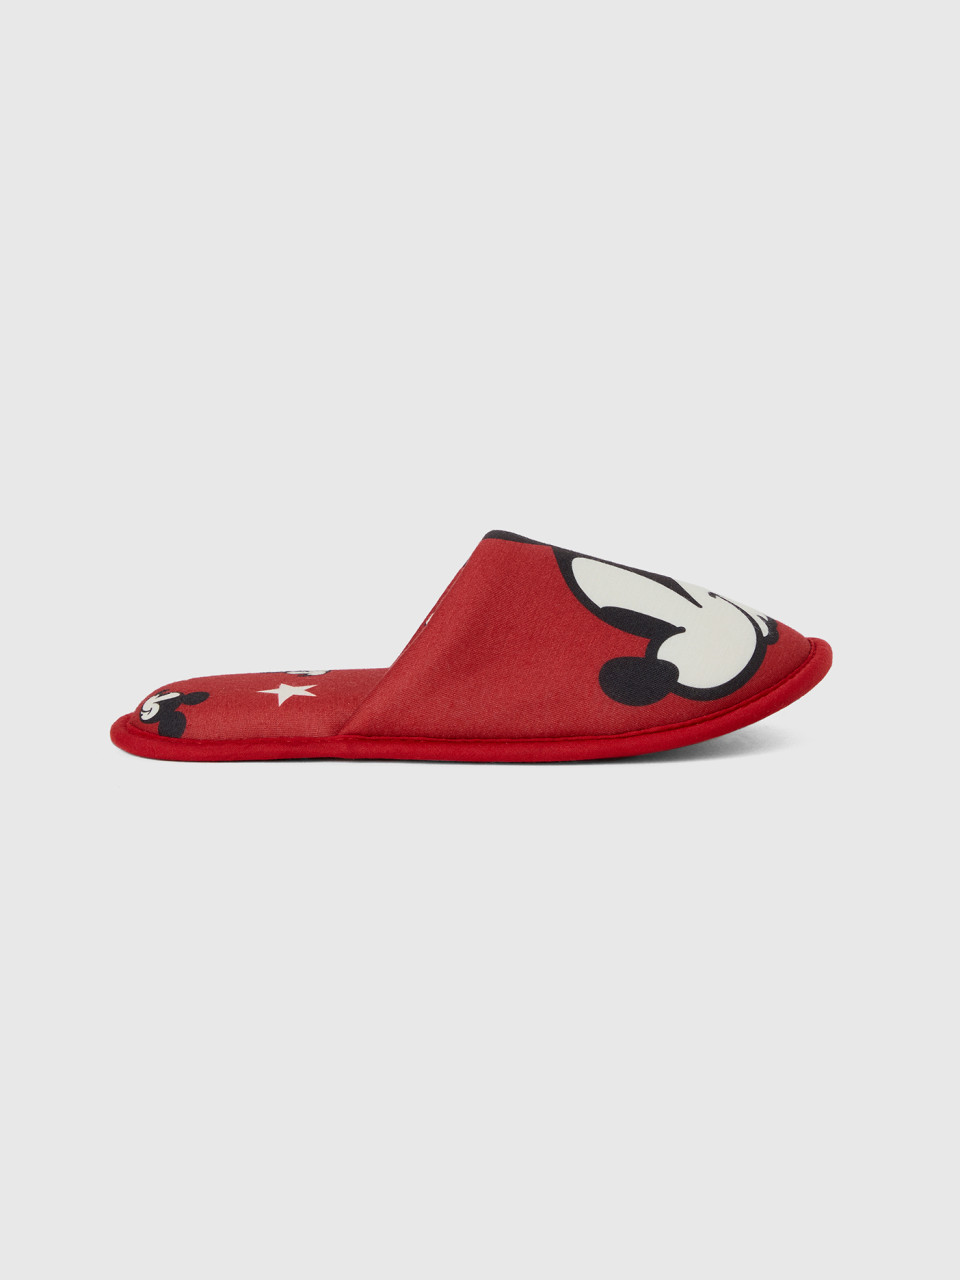 Benetton, Red Mickey Mouse Slippers,5-2C-Y, Red